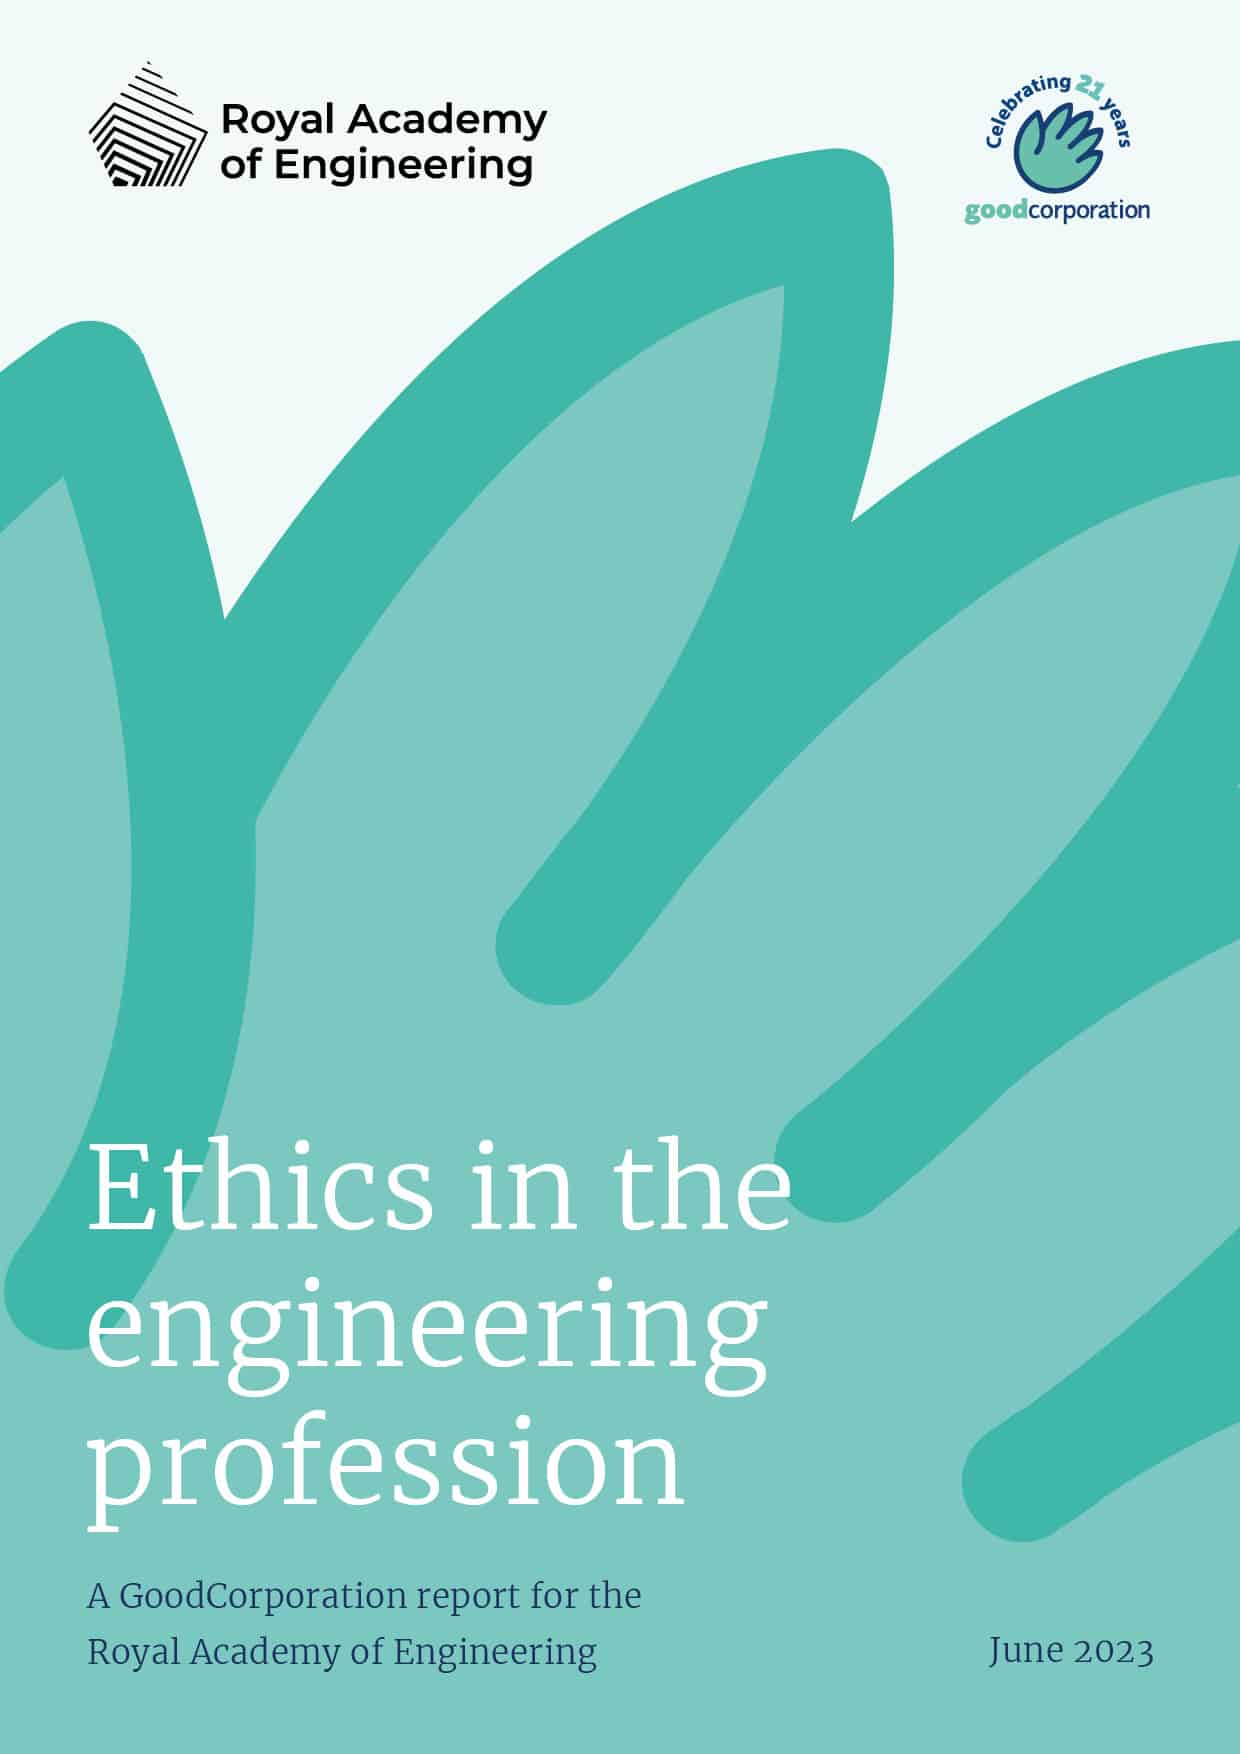 Front cover of GoodCorporation's report on Ethics in the engineering profession featuring the GoodCorporation 'hand' logo